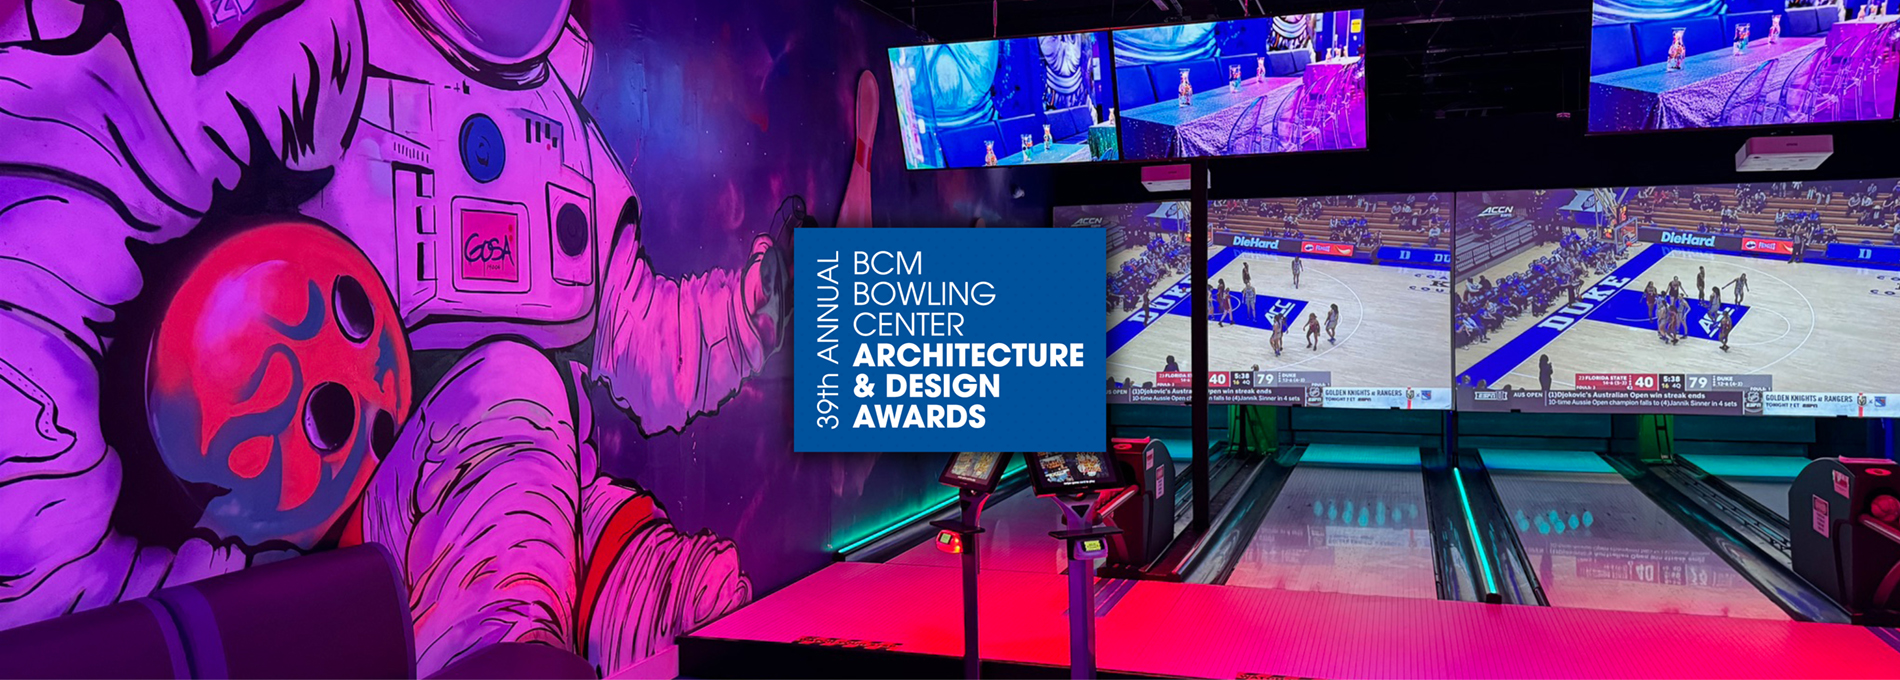 QubicaAMF: FunDimension - Bowling Design Awards banner